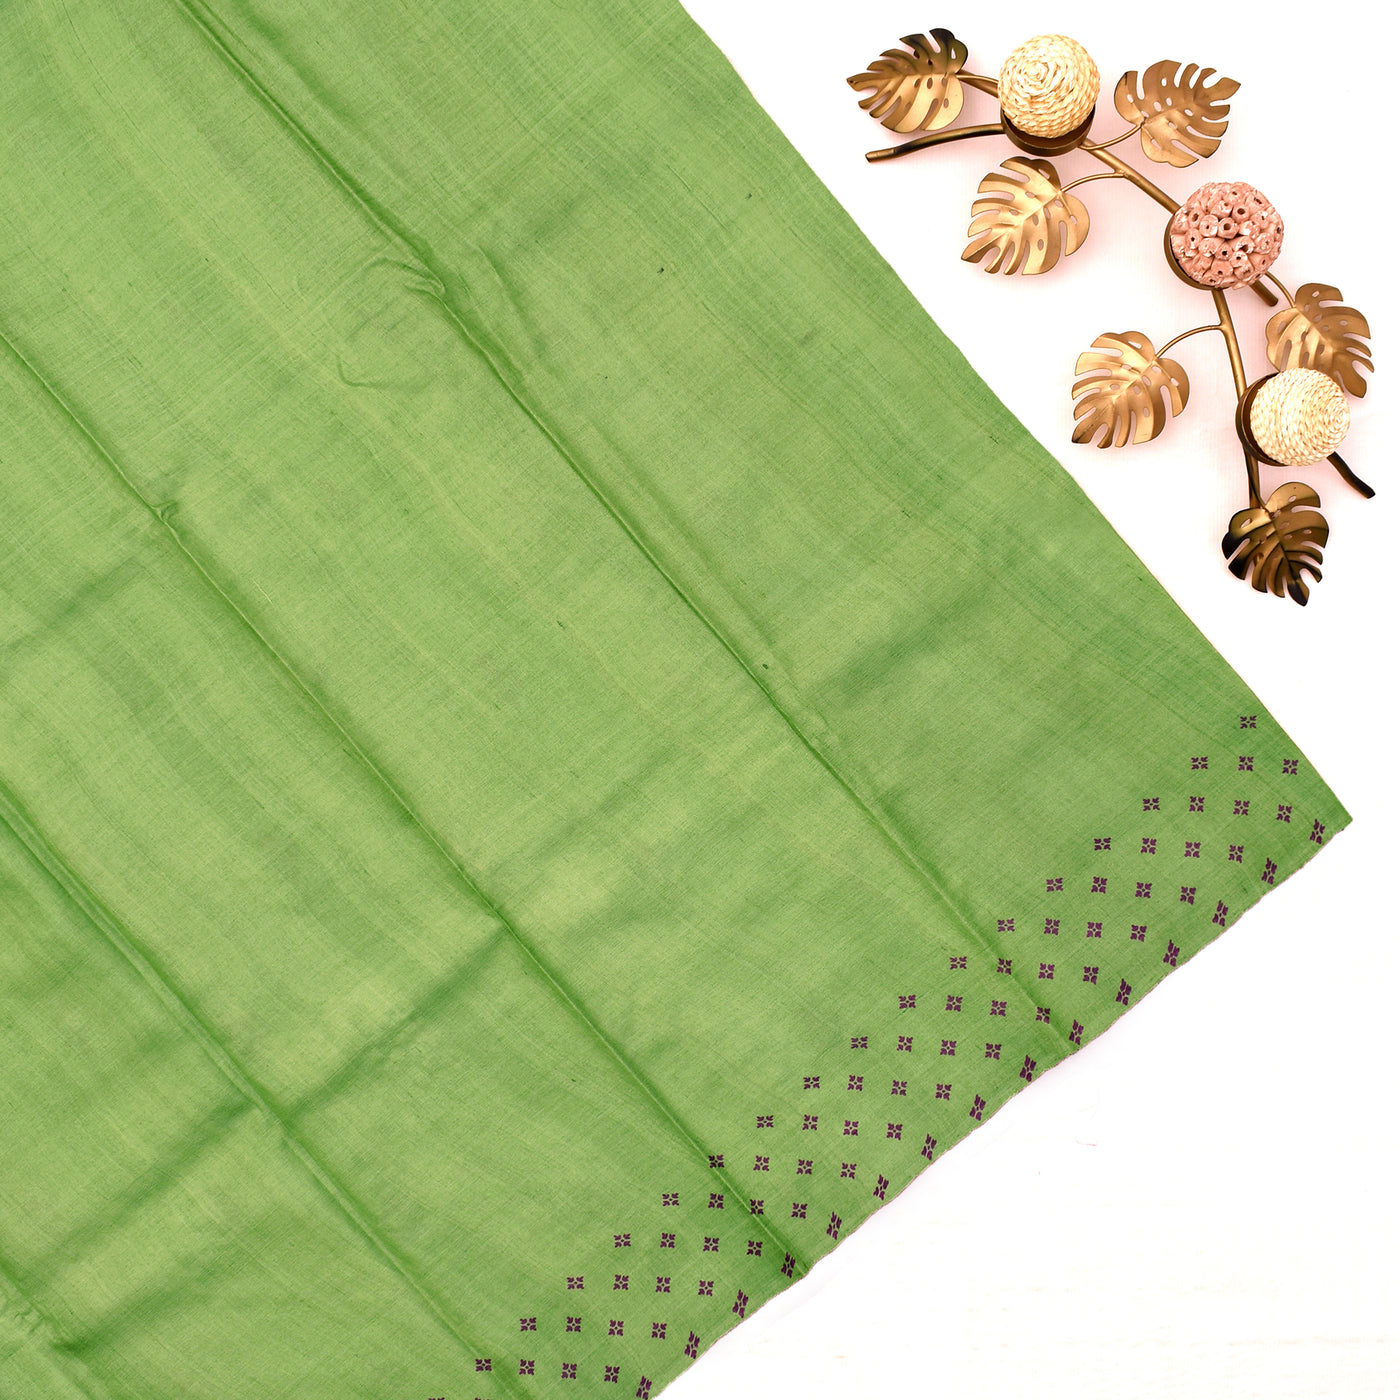 Apple Green Tussar Silk Saree with Mirror Embroidery Printed Design